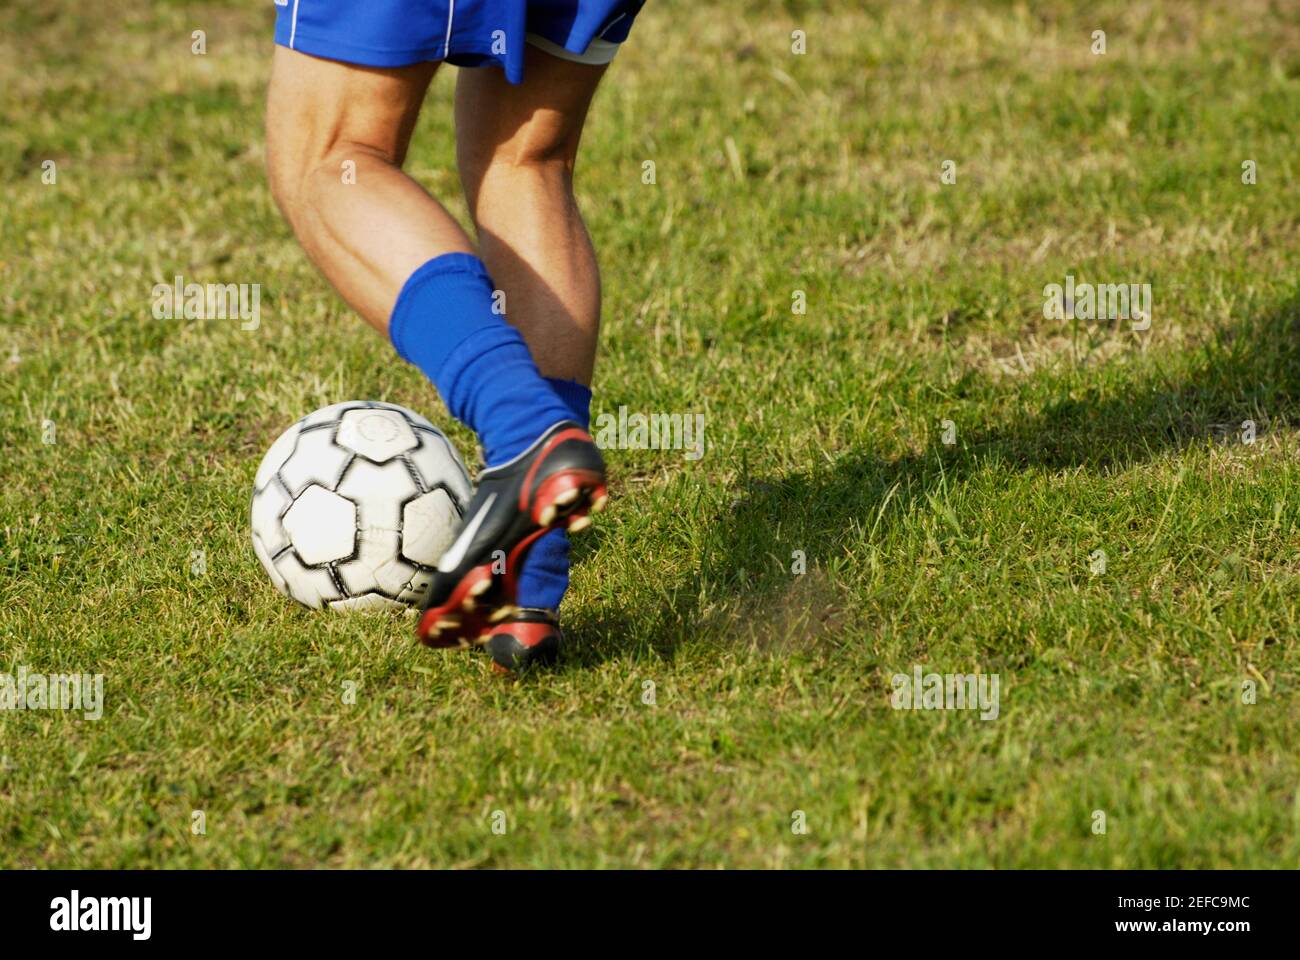 Low section view of a soccer player dodging a soccer ball Stock Photo